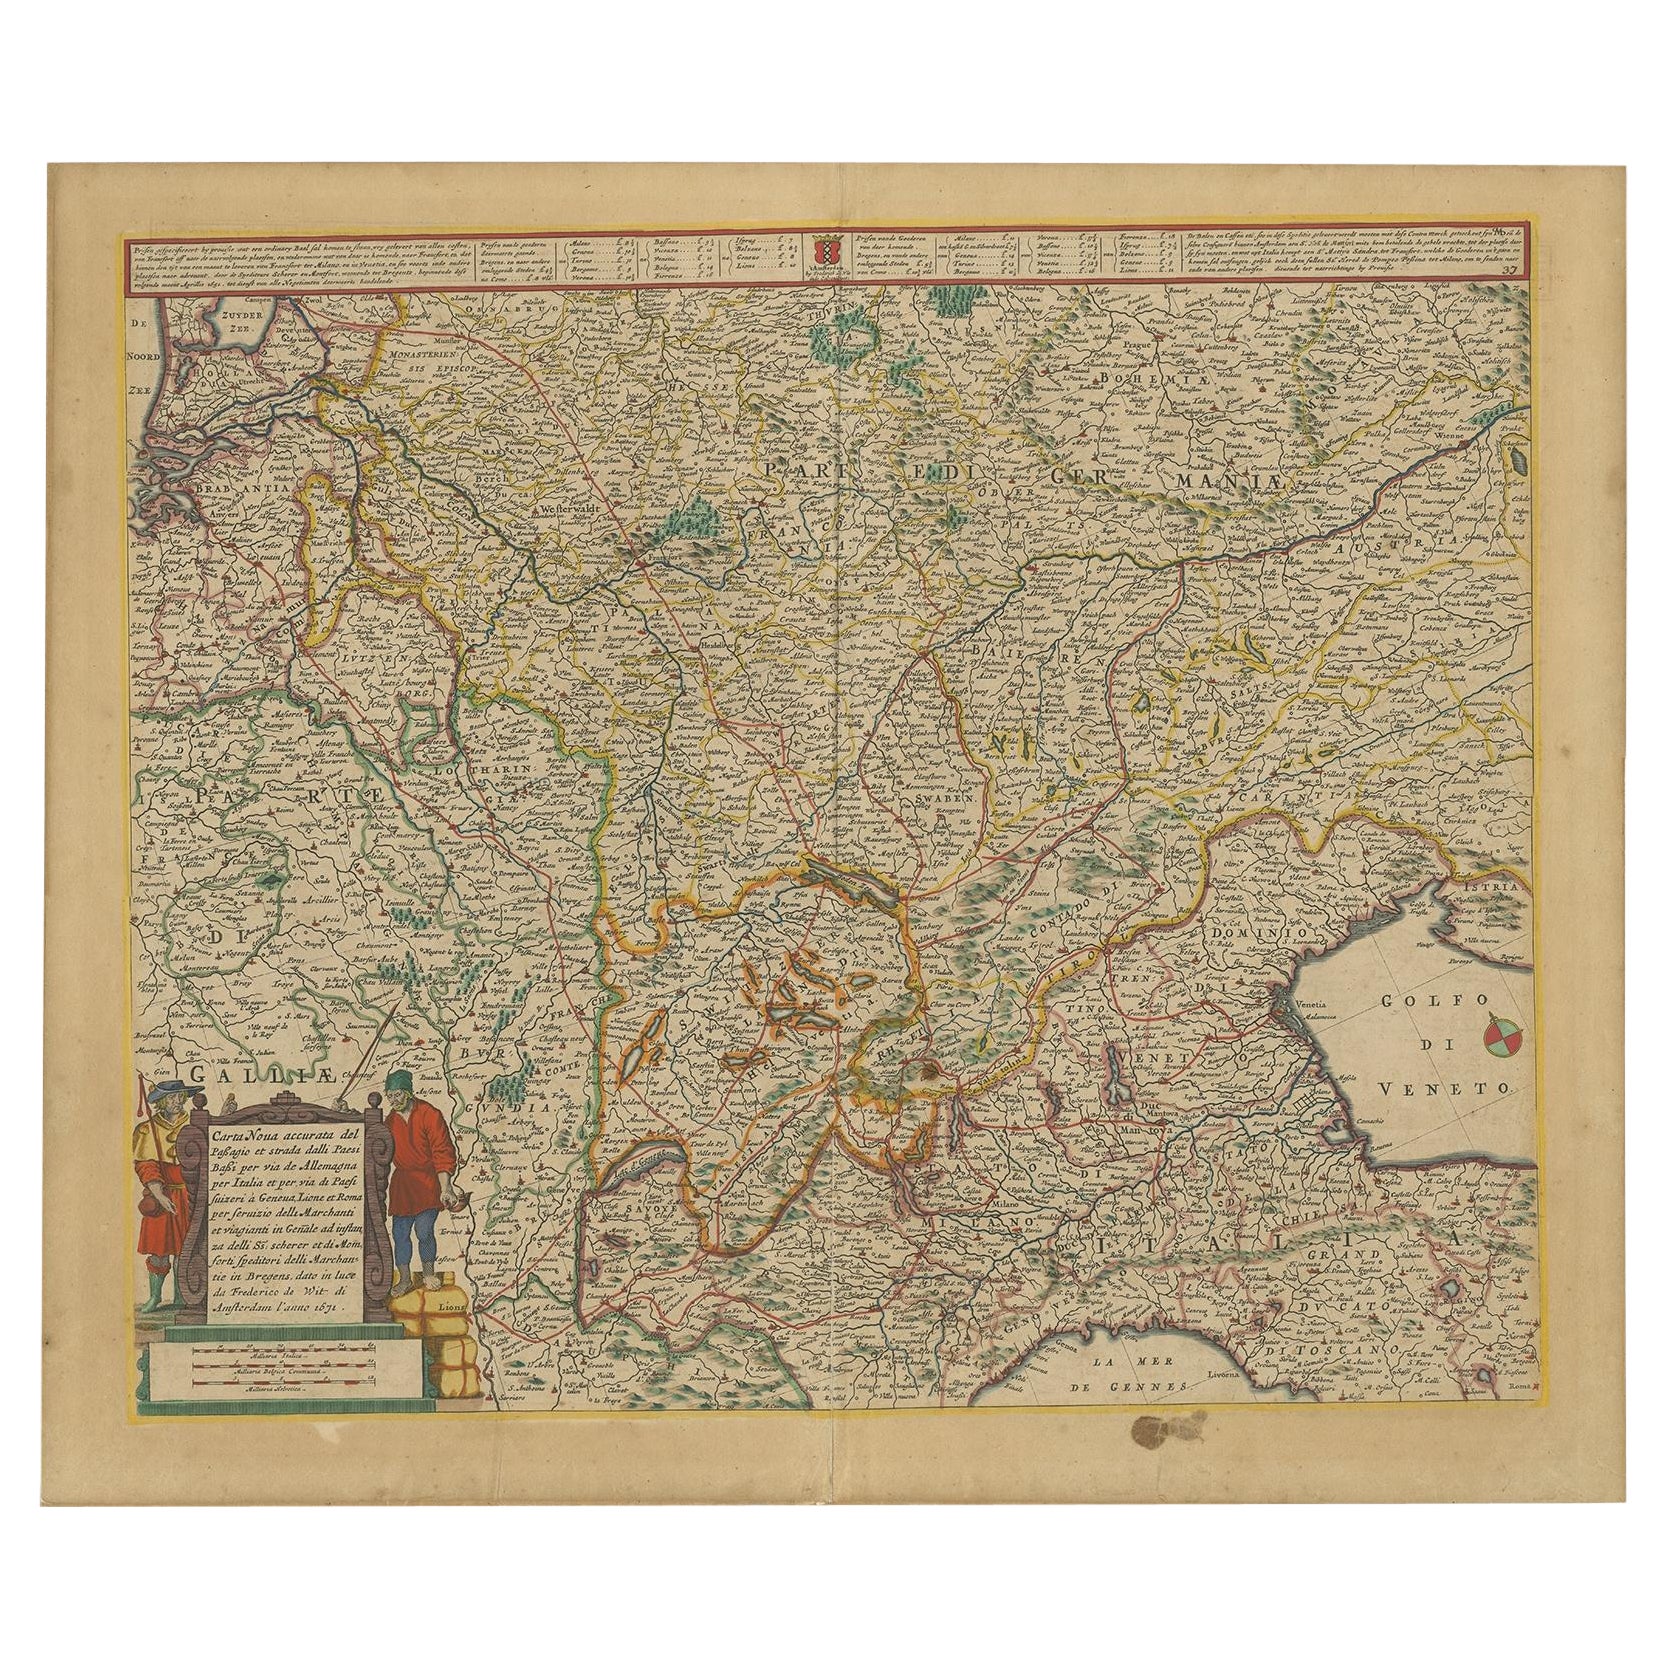 Old Map of the Western Part of Central Europe, c.1680